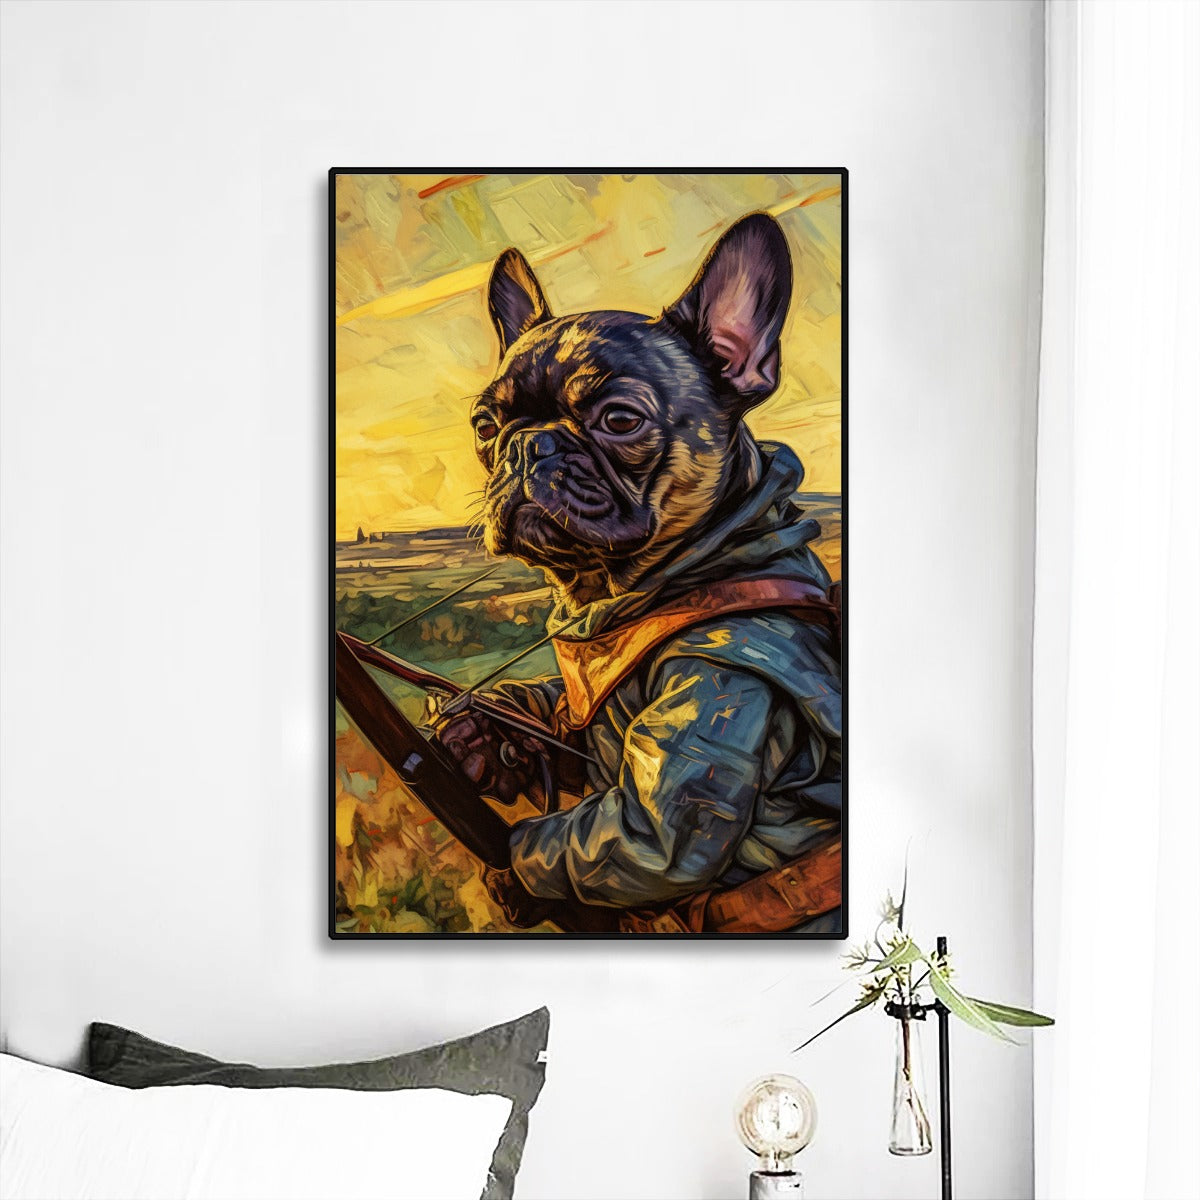 Fascinating Frenchie-Focused Wall Mural